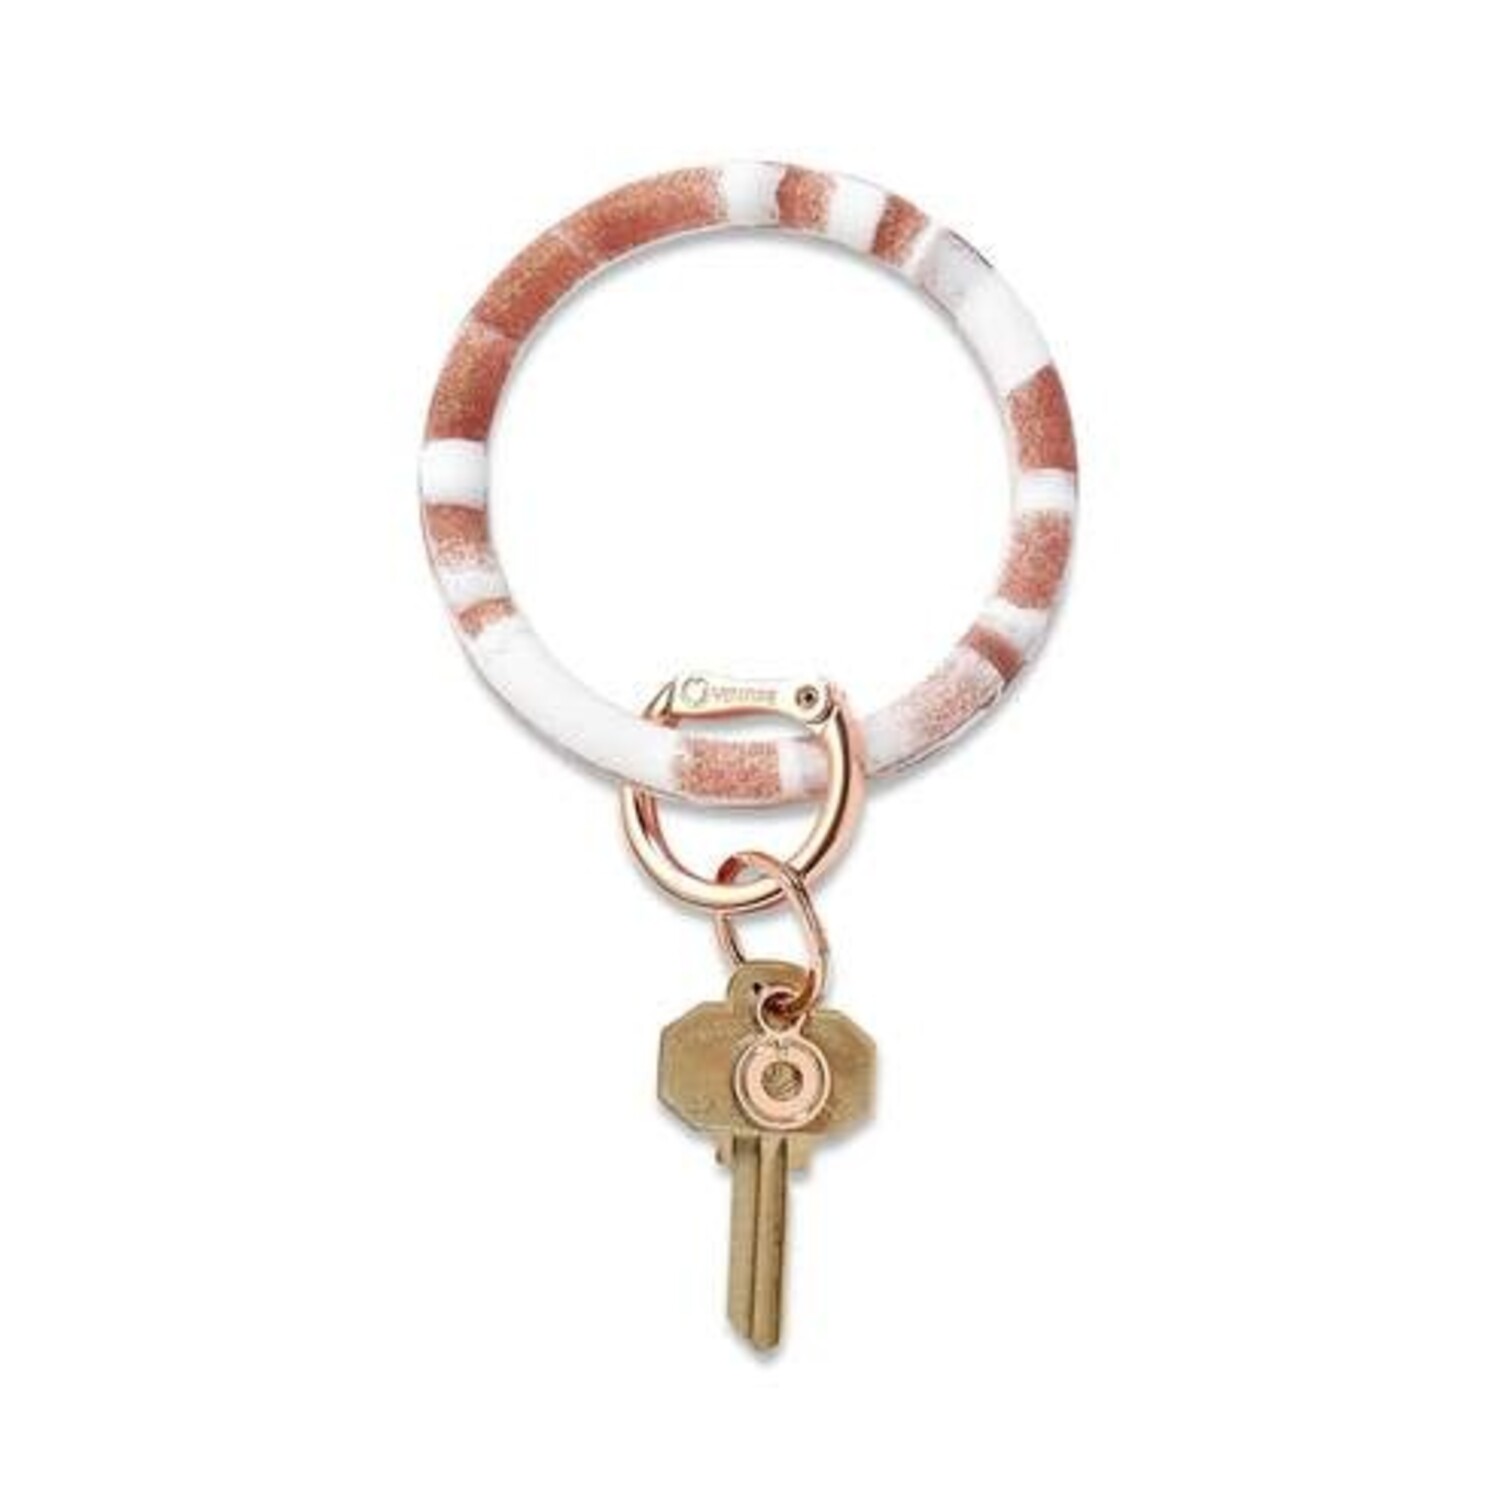 Silicone Big O Key Ring - Cherry on Top Marble